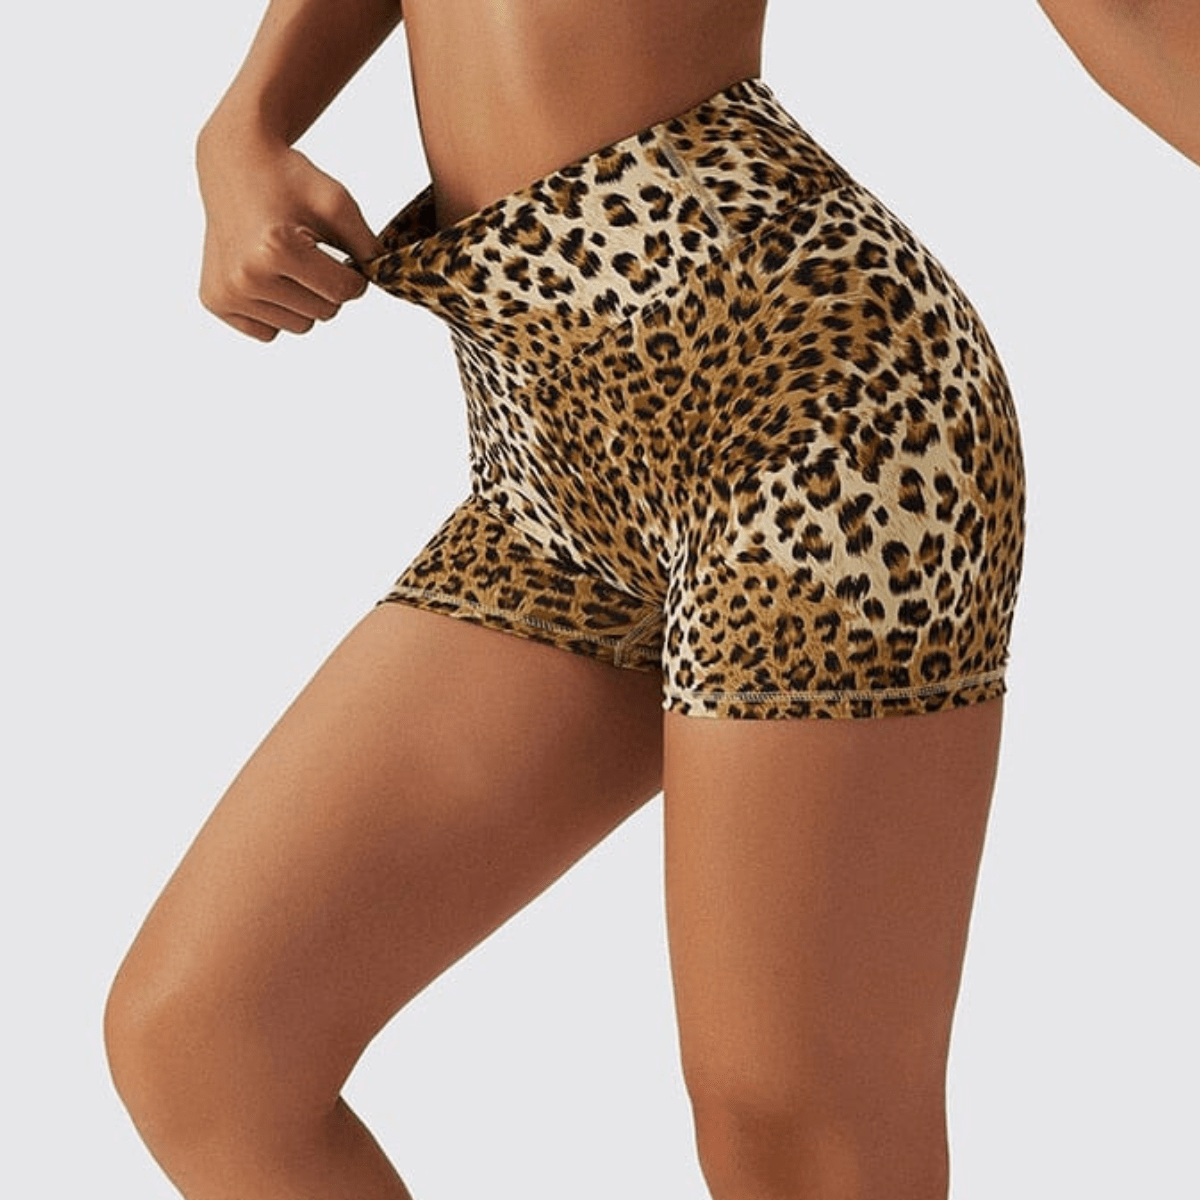 Chic Leopard Shorts Shorts Starlethics Brown-Yellow S 